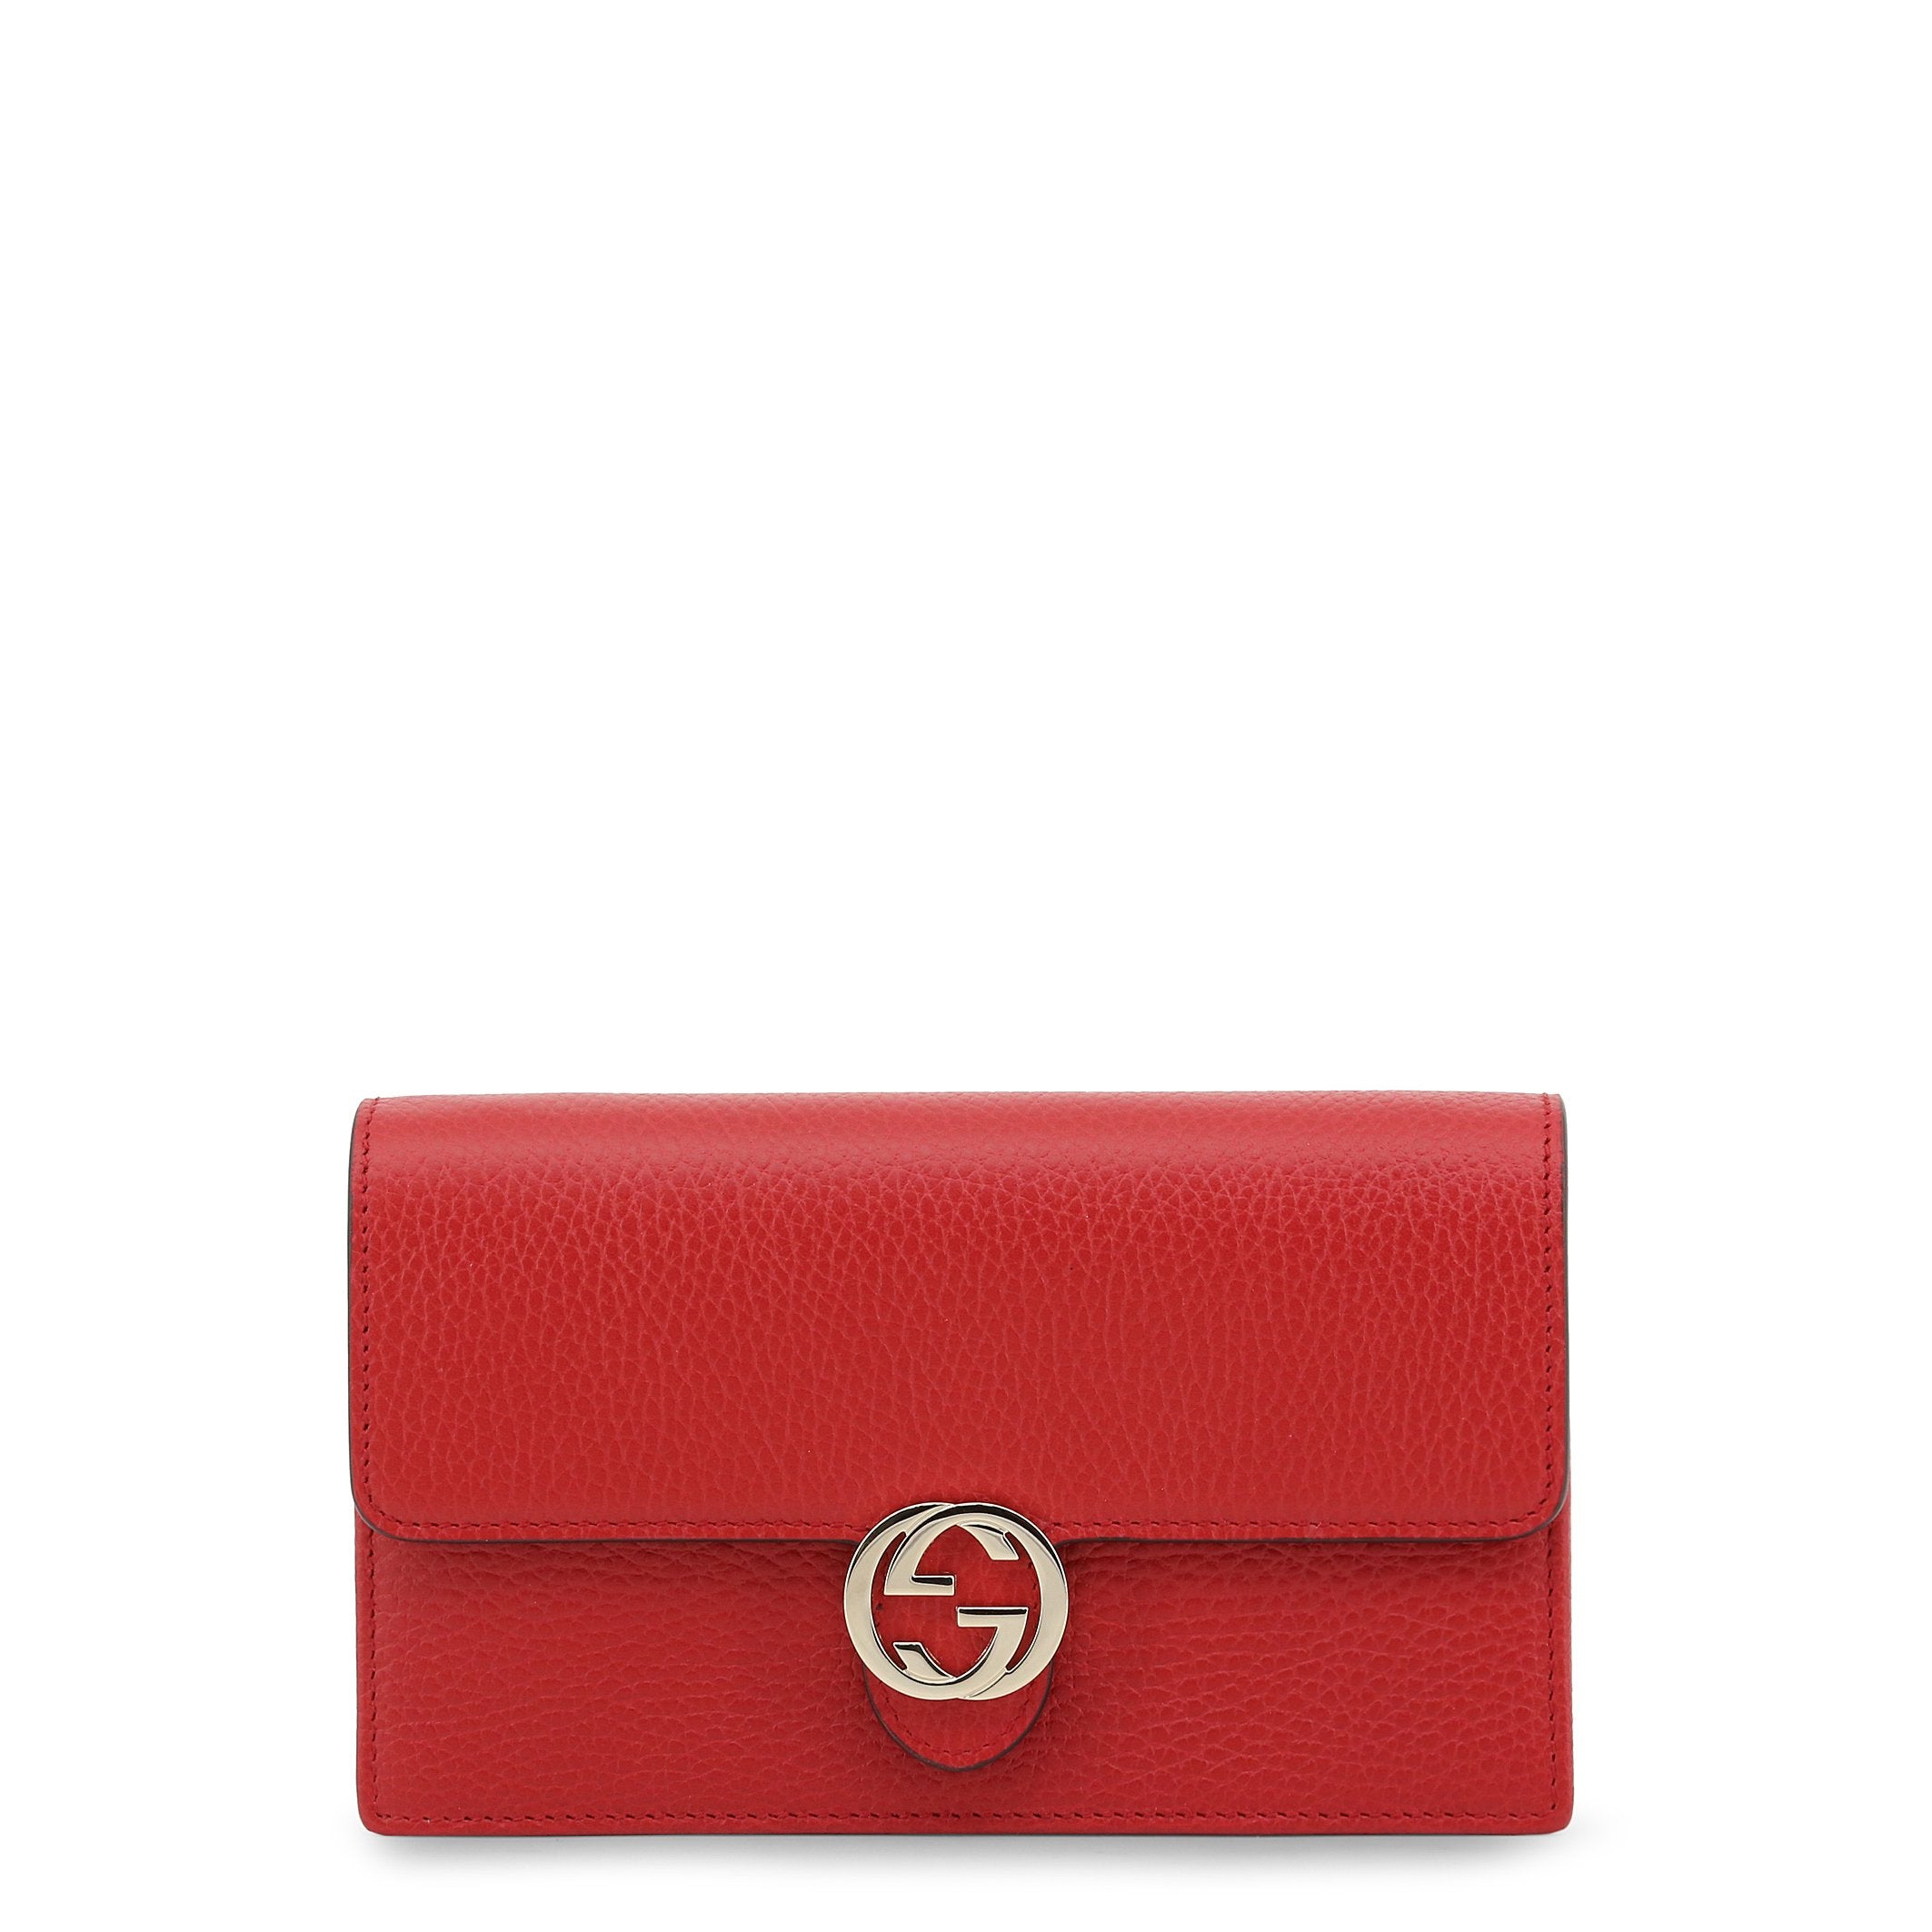 Buy & Consign Authentic Gucci Calfskin Matelasse GG Marmont Chain Wallet at The Plush Posh